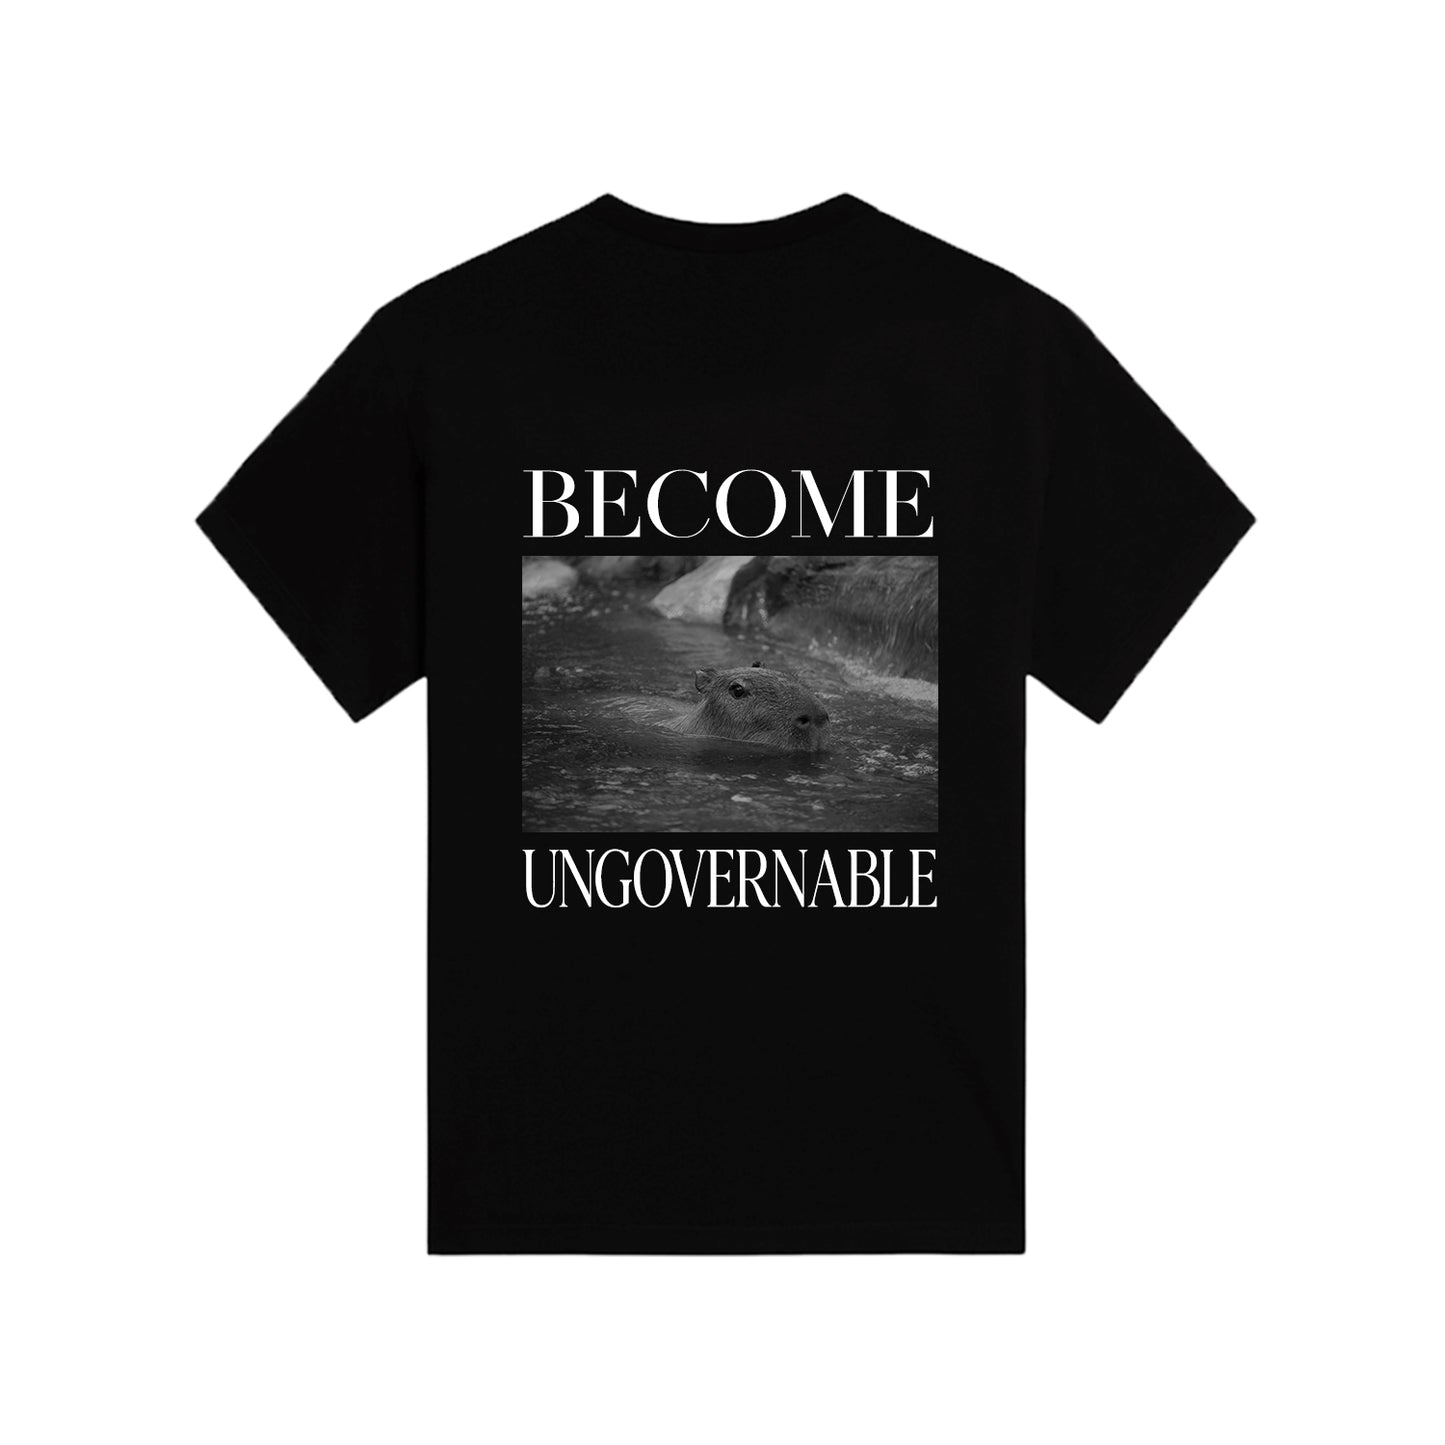 BECOME UNGOVERNABLE